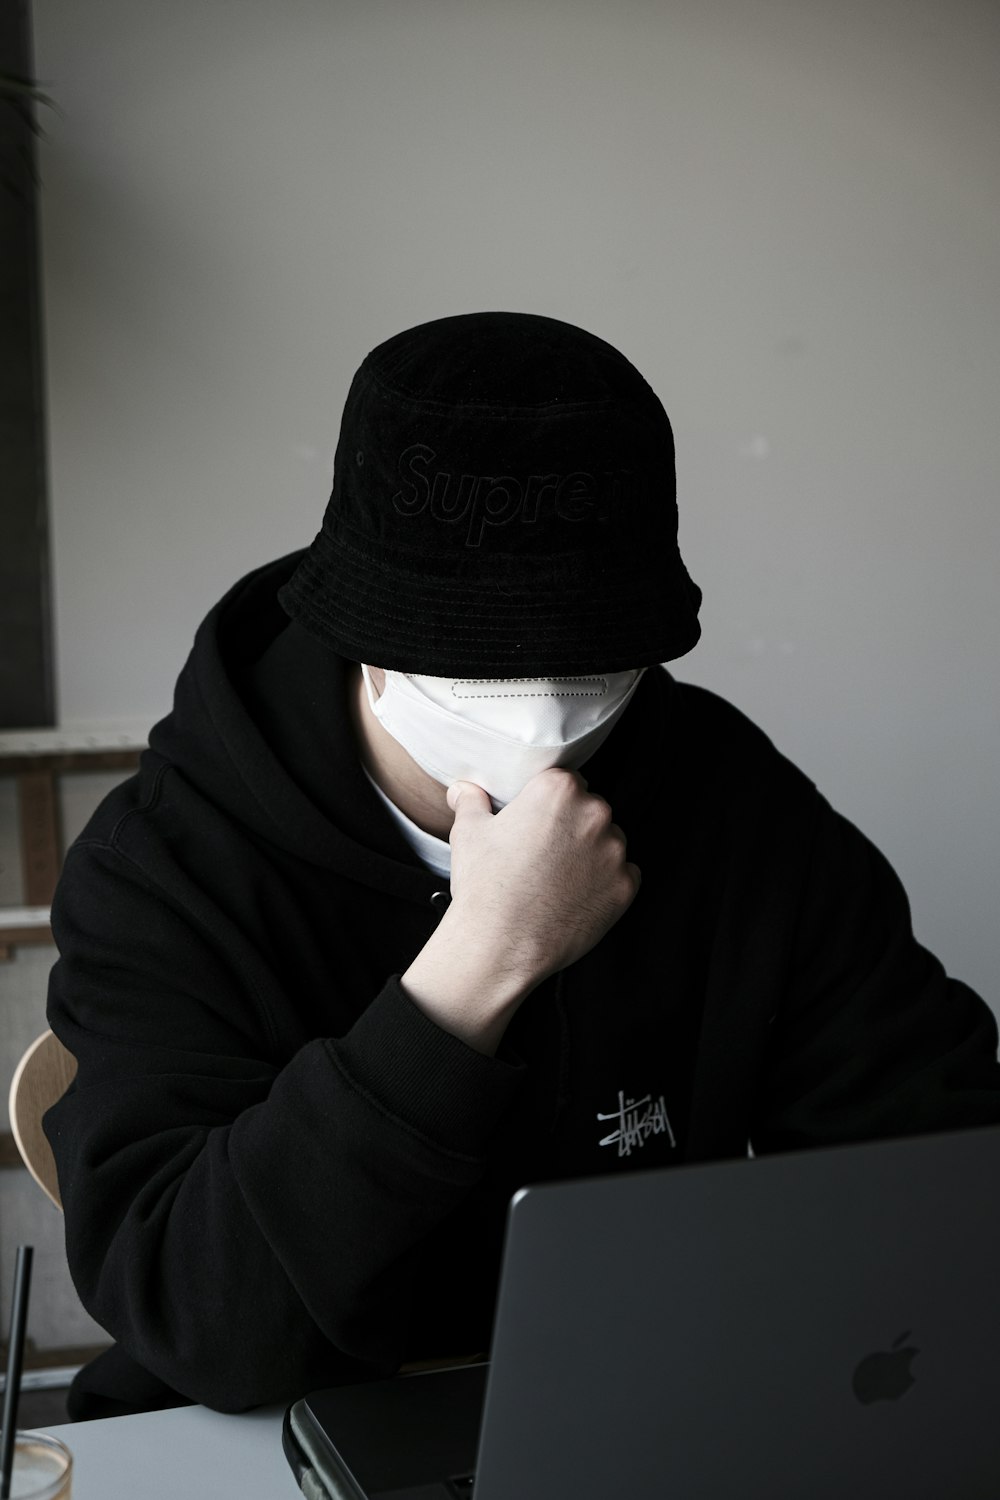 a person wearing a black hat and covering his face with a white mask